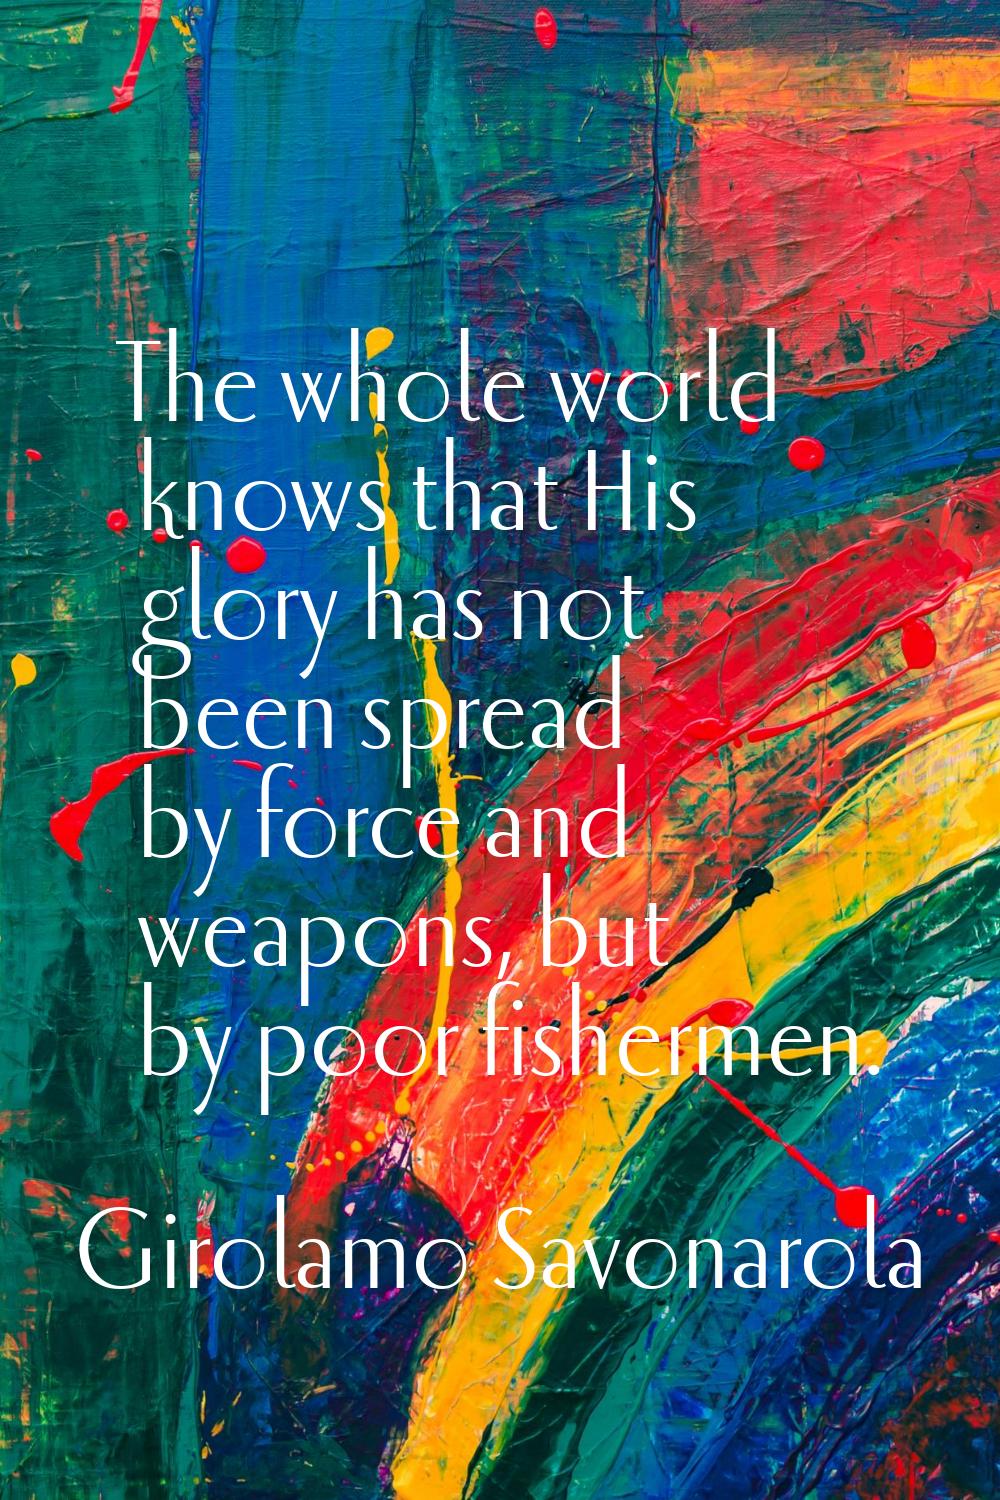 The whole world knows that His glory has not been spread by force and weapons, but by poor fisherme